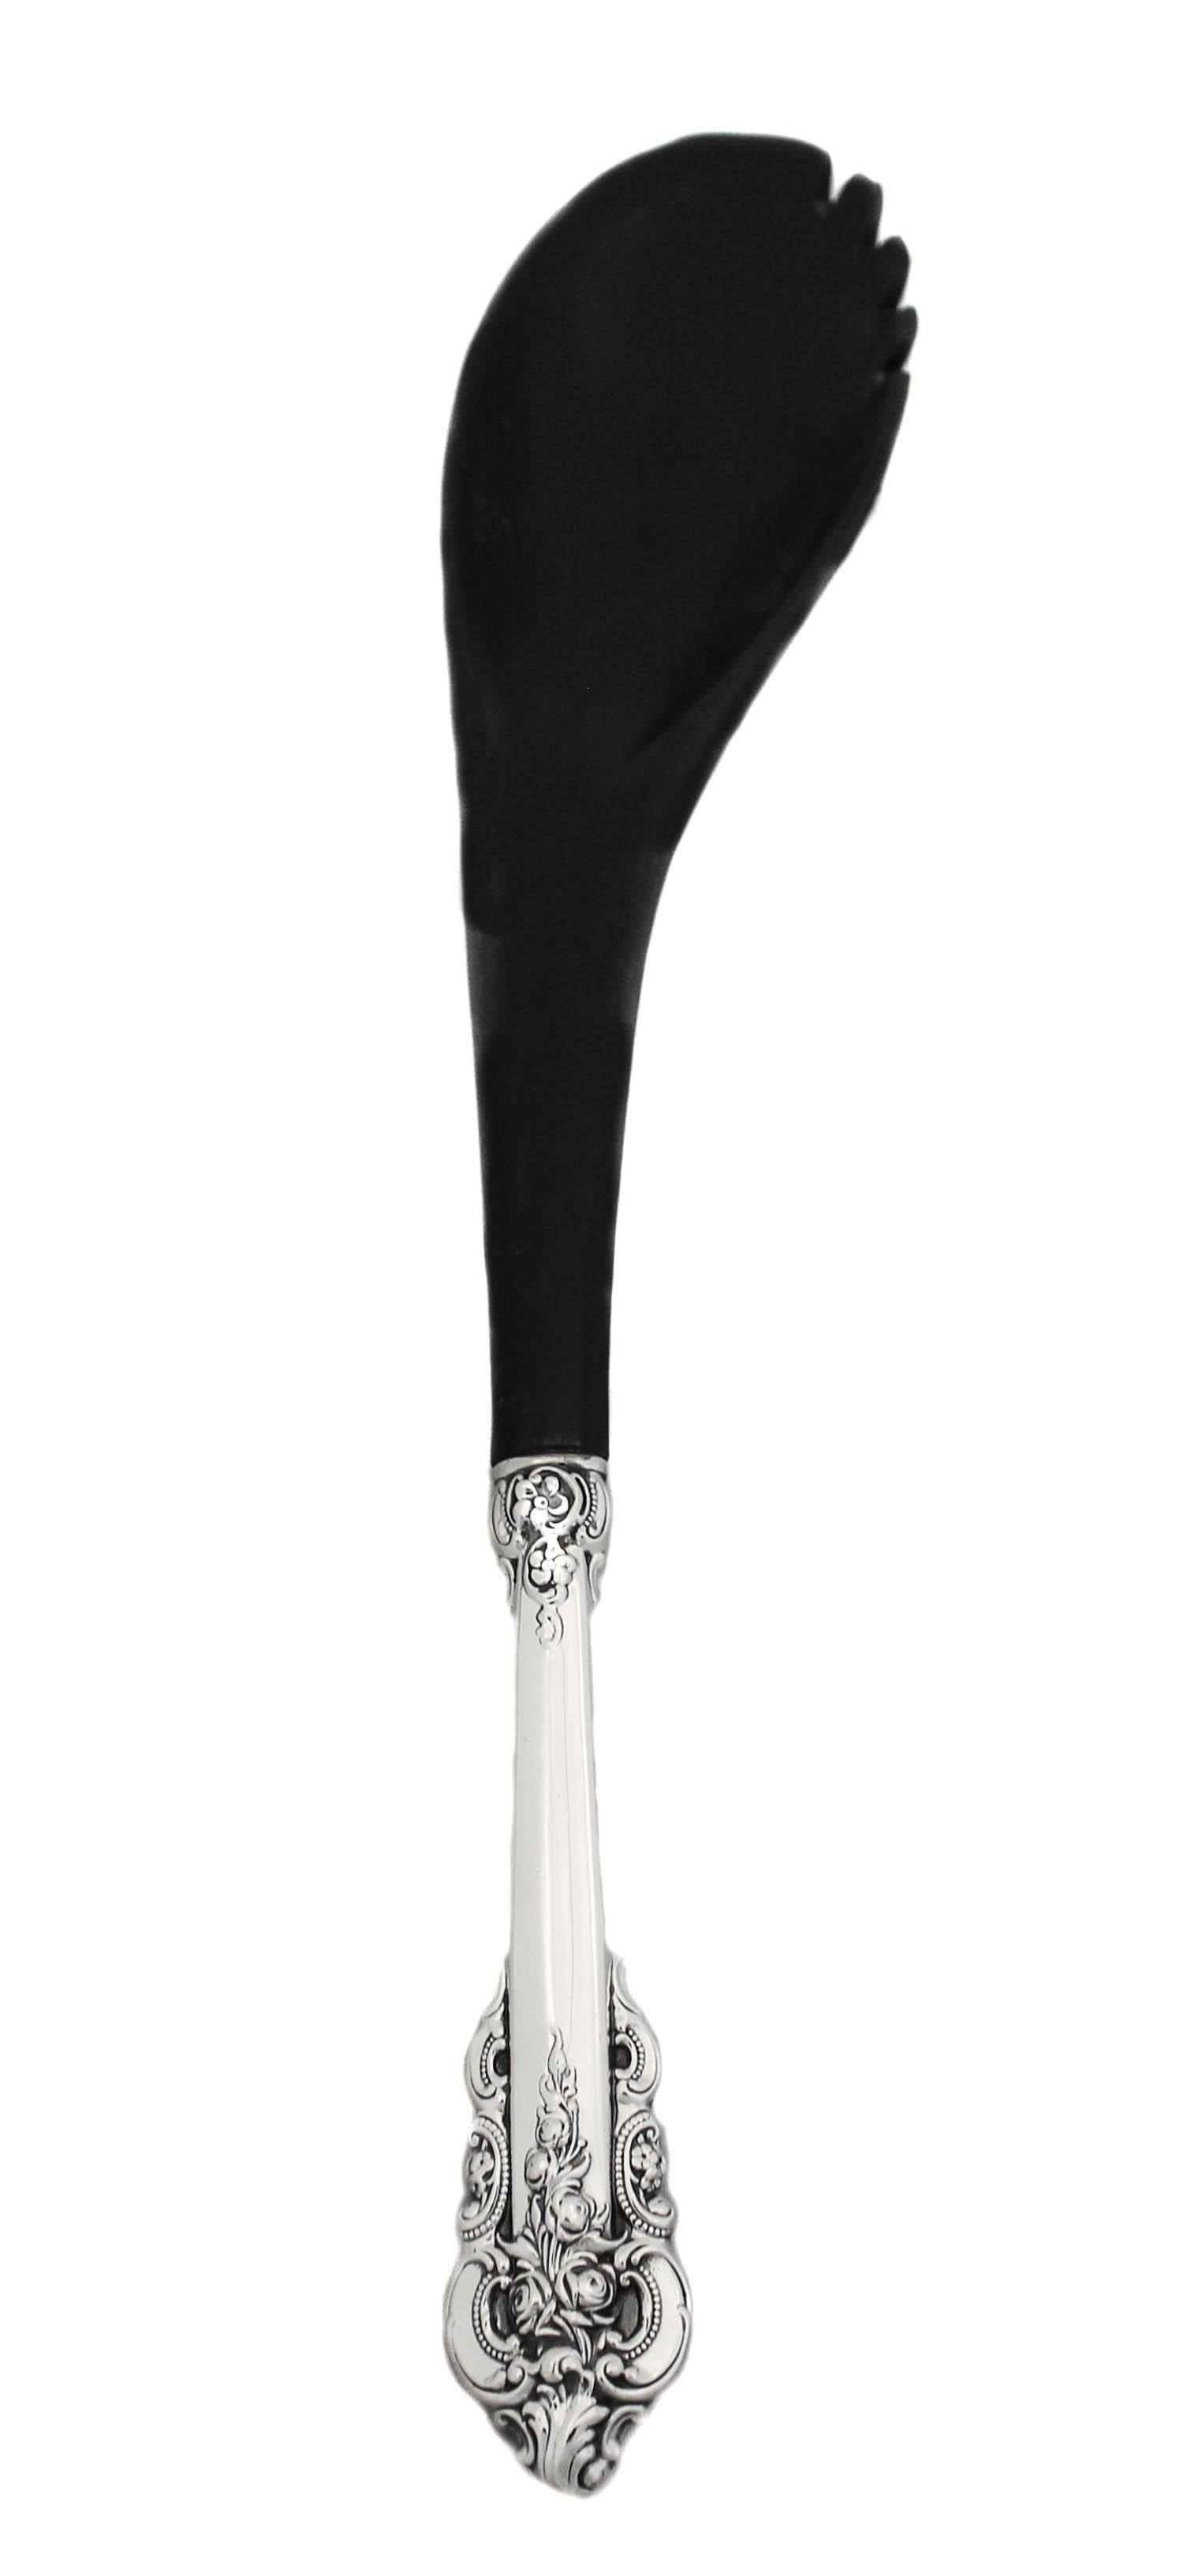 Being offered is a sterling silver salad fork and spoon set by Wallace Silversmiths in the Grande Baroque pattern. As you may or may not know, Grande Baroque is one of the most popular flatware patterns of all time. It’s ornate design gives it a